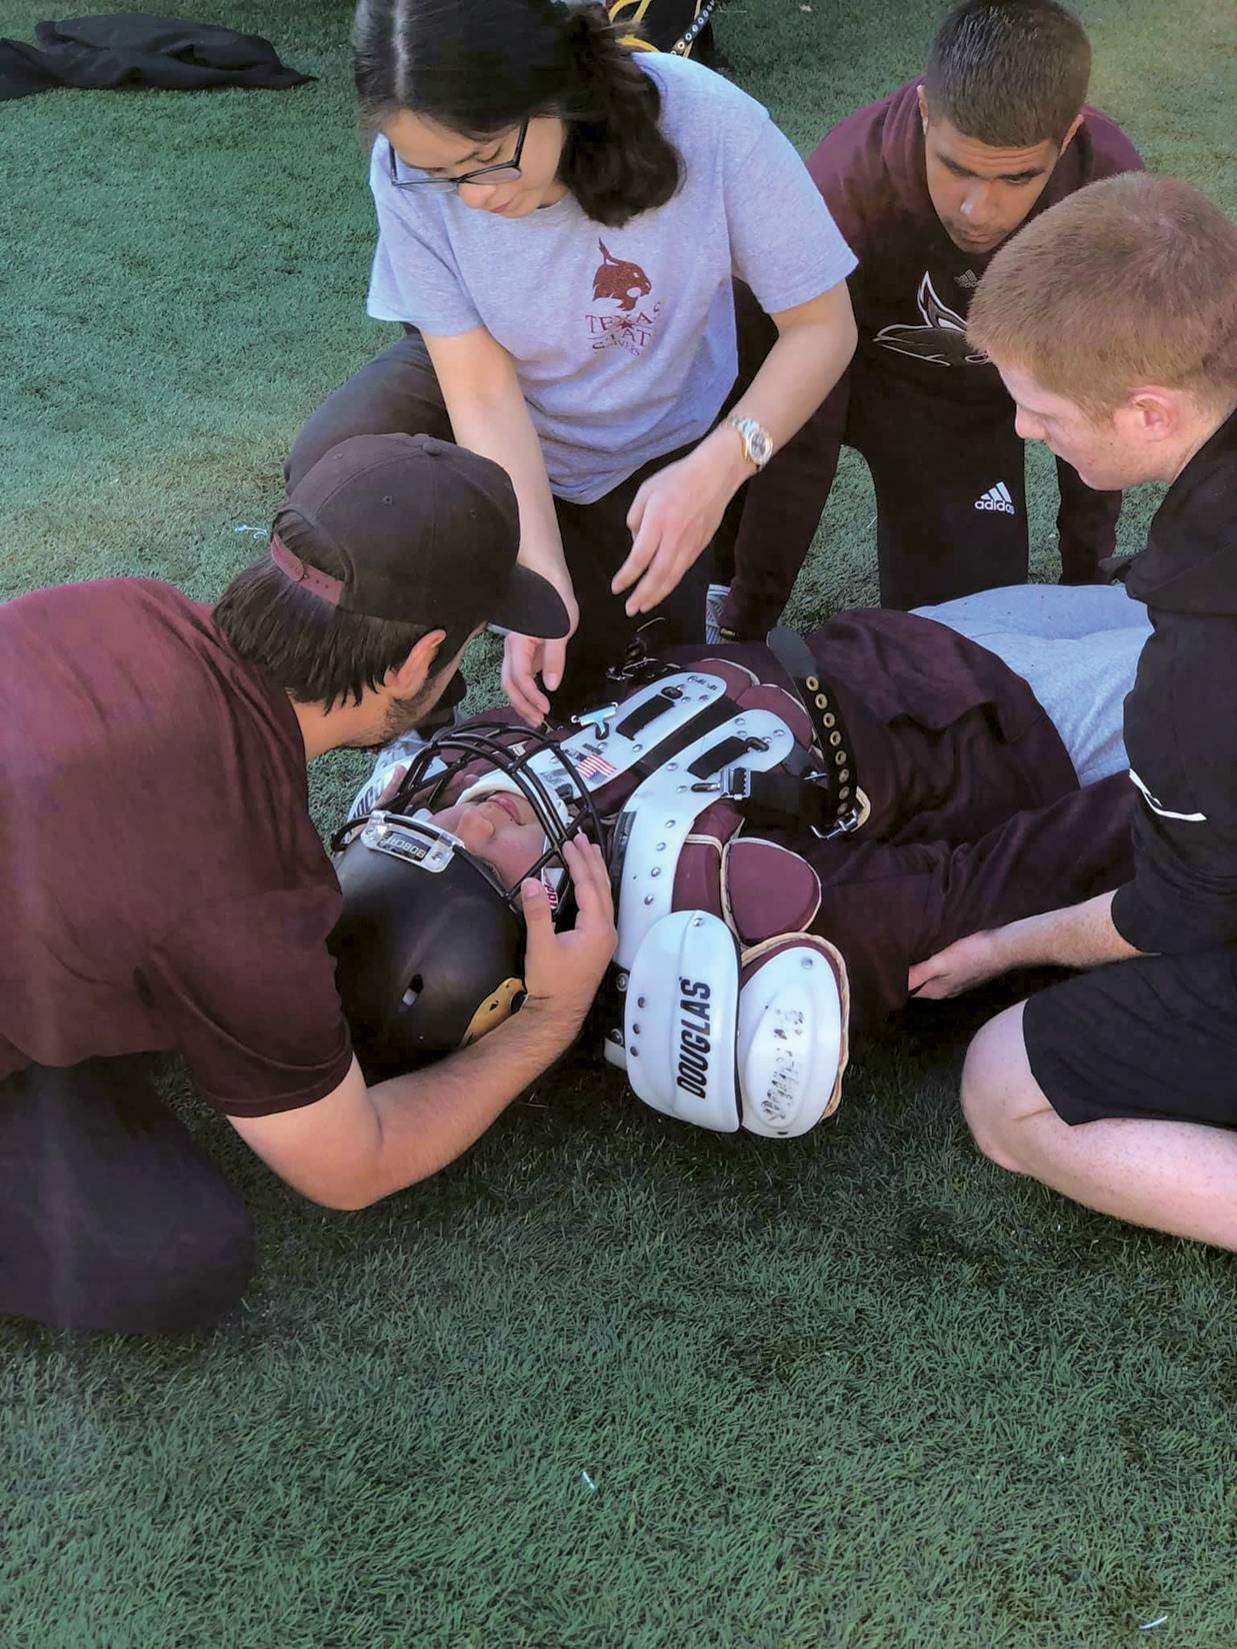 students looking over a football player on the ground